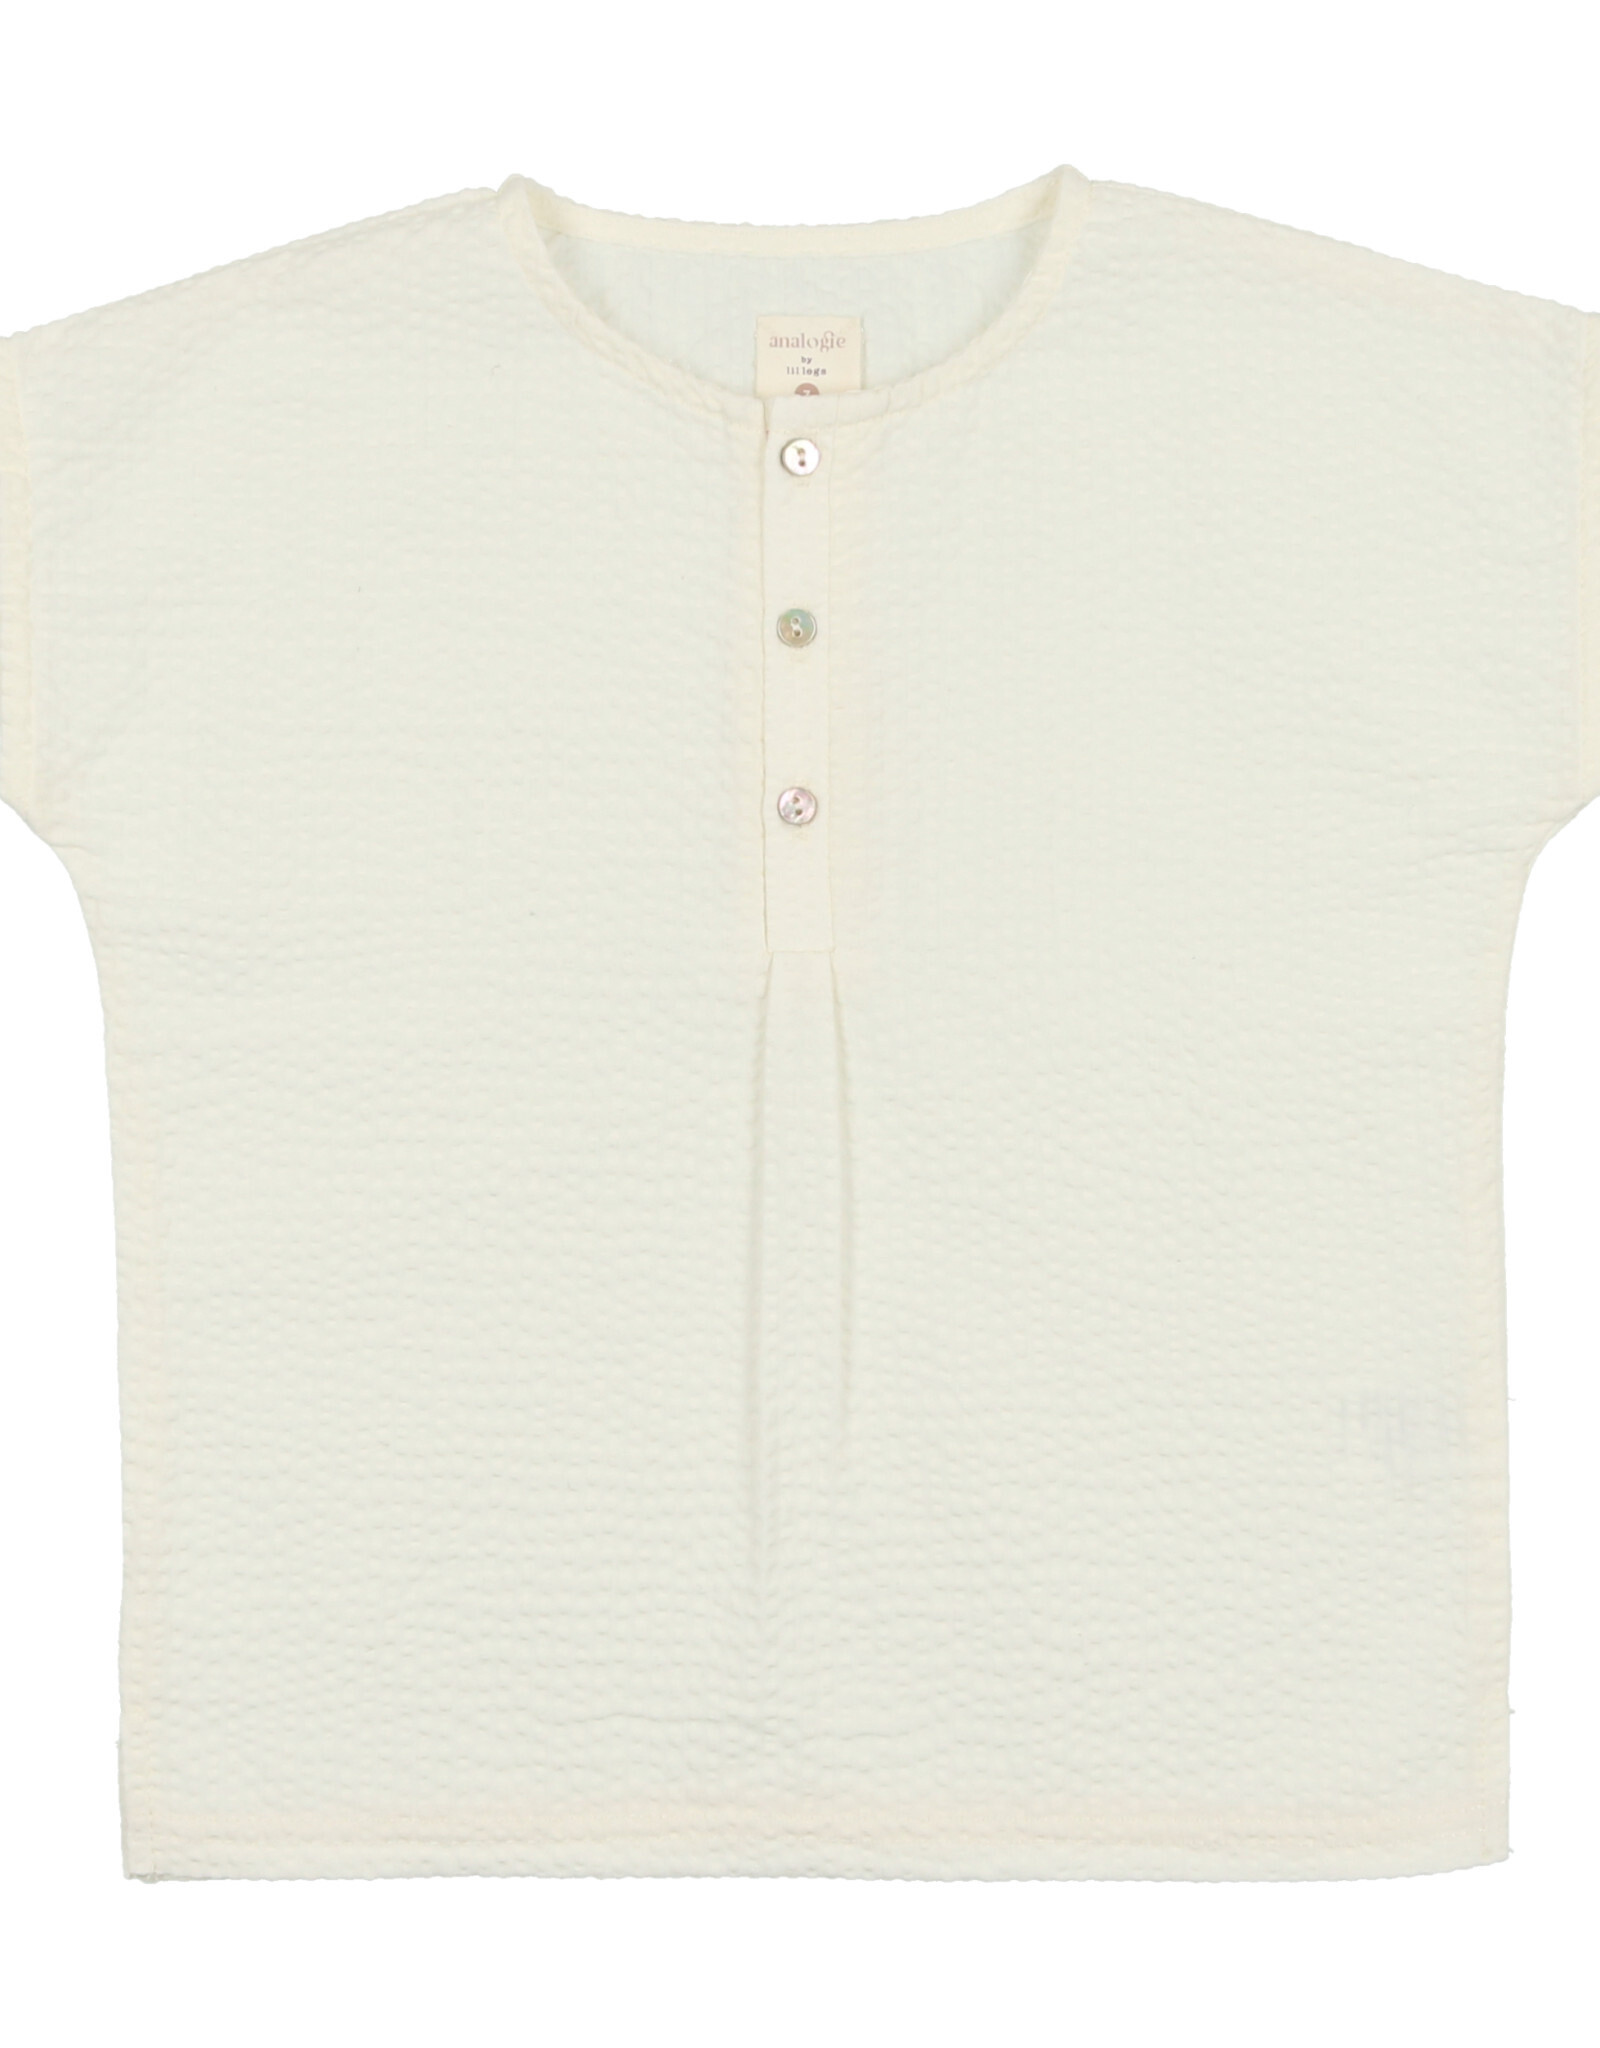 Analogie Pleated Button Shirt